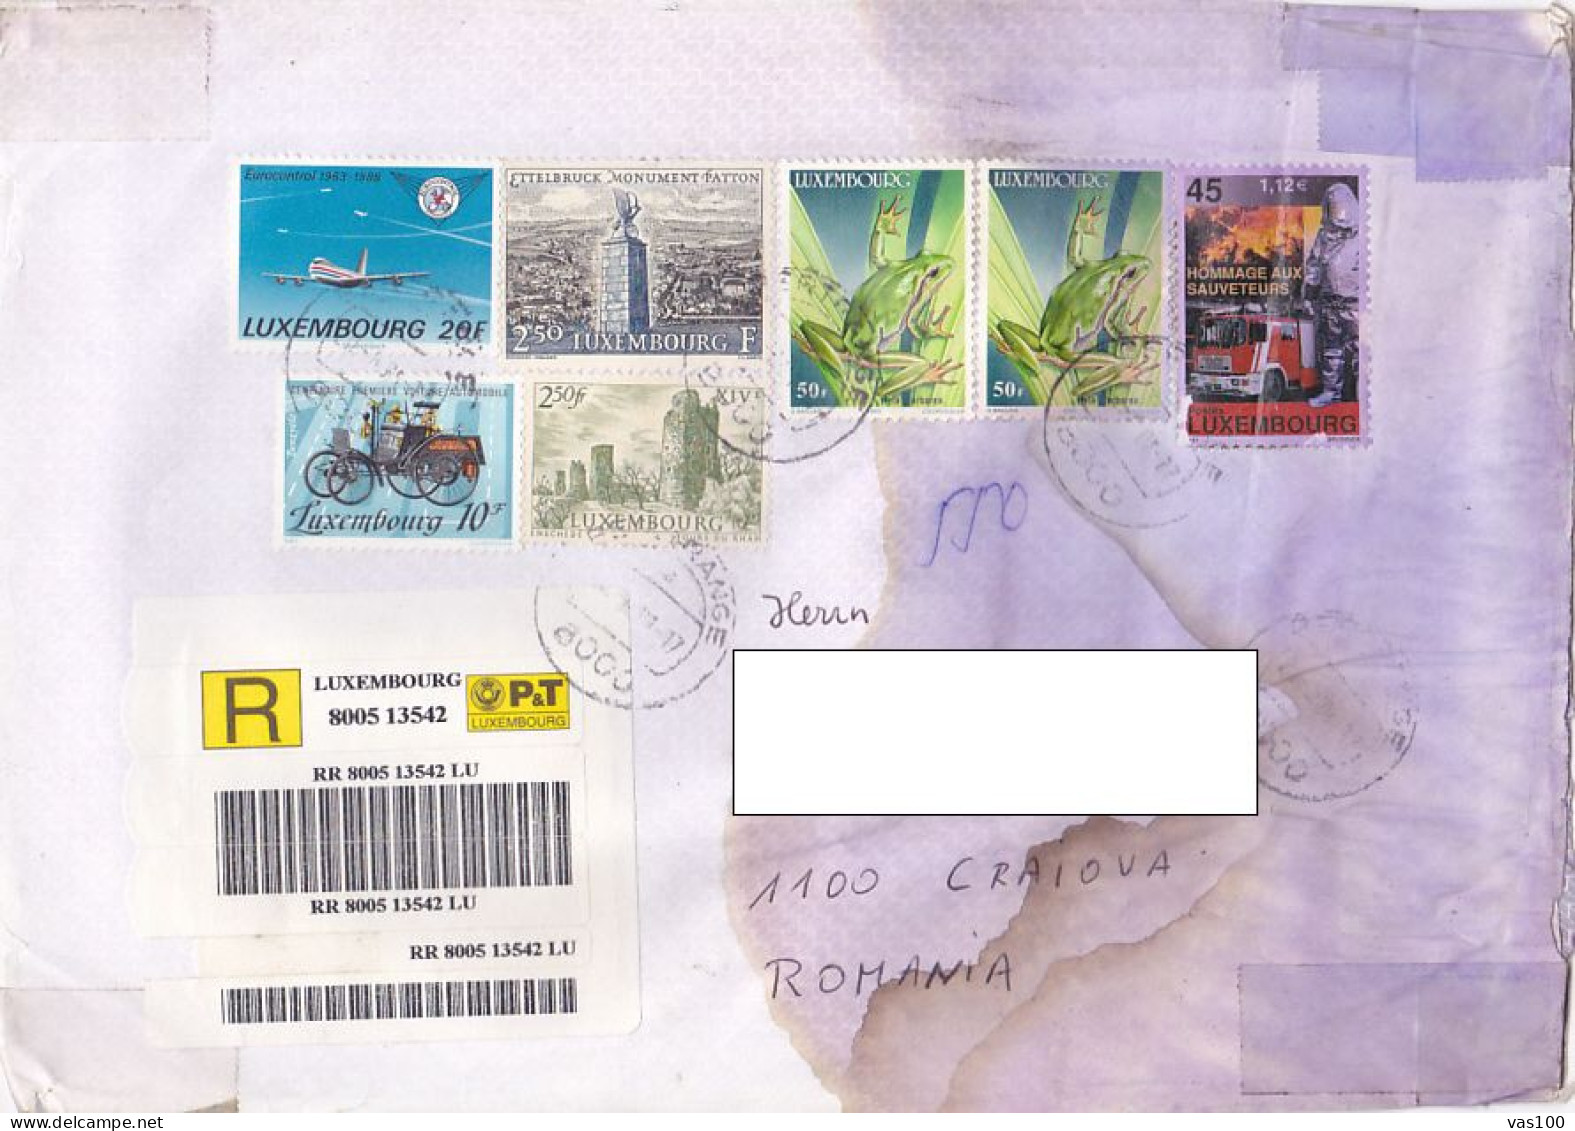 PLANE, FIRST CAR, MONUMENT, TOWER, FROG, FIREFIGHTERS, STAMPS ON REGISTERED COVER, 2001, LUXEMBOURG - Briefe U. Dokumente